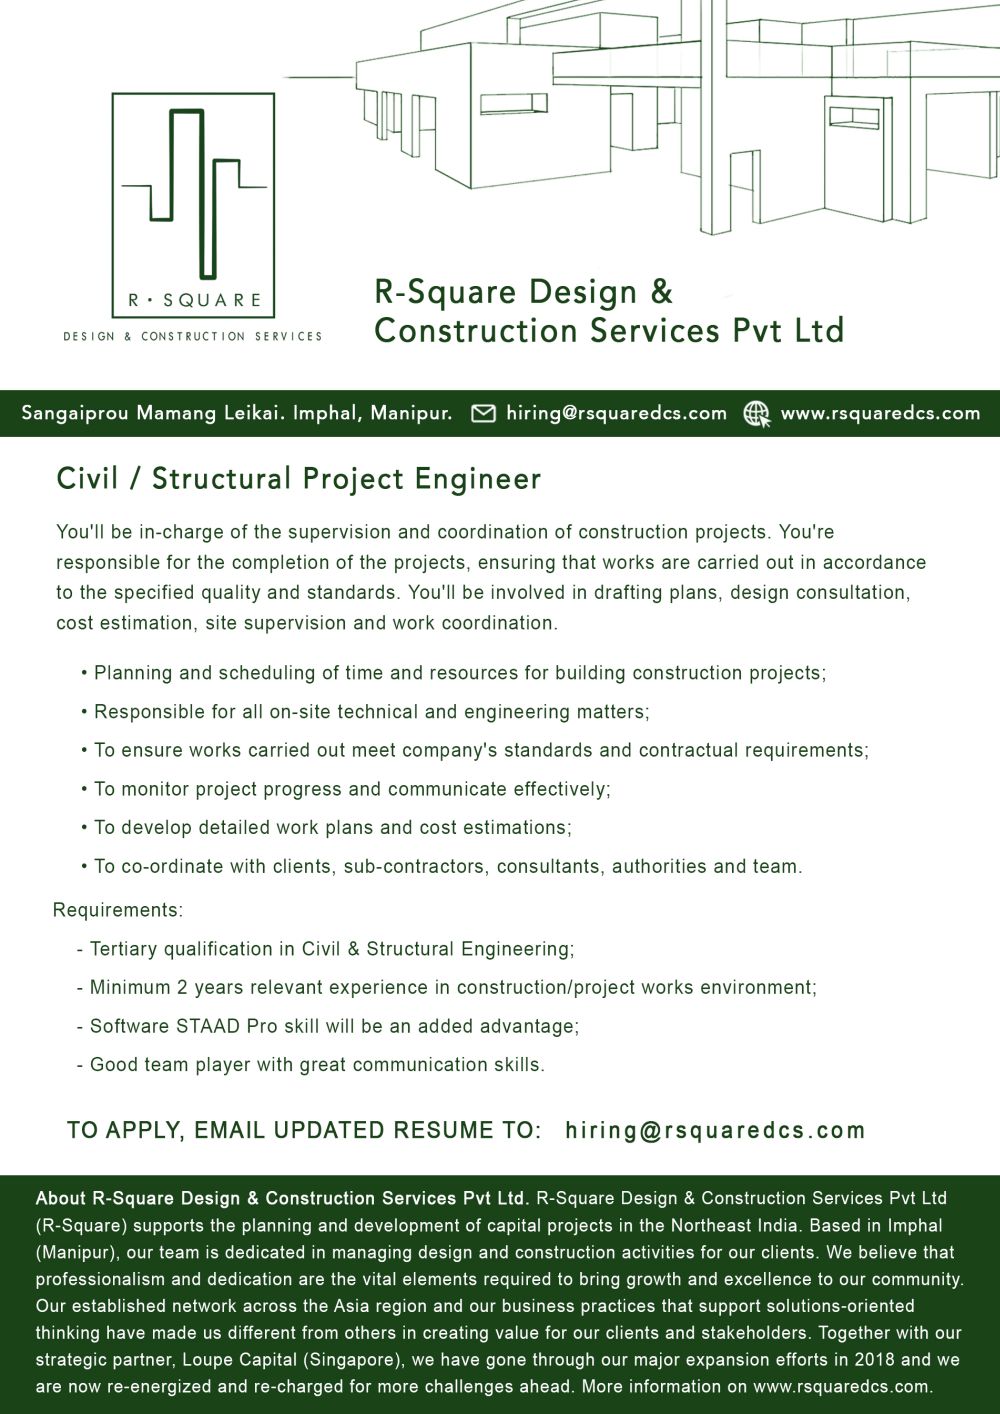 Civil/Structural Project Engineer required at R-Square Design, Canchipur 